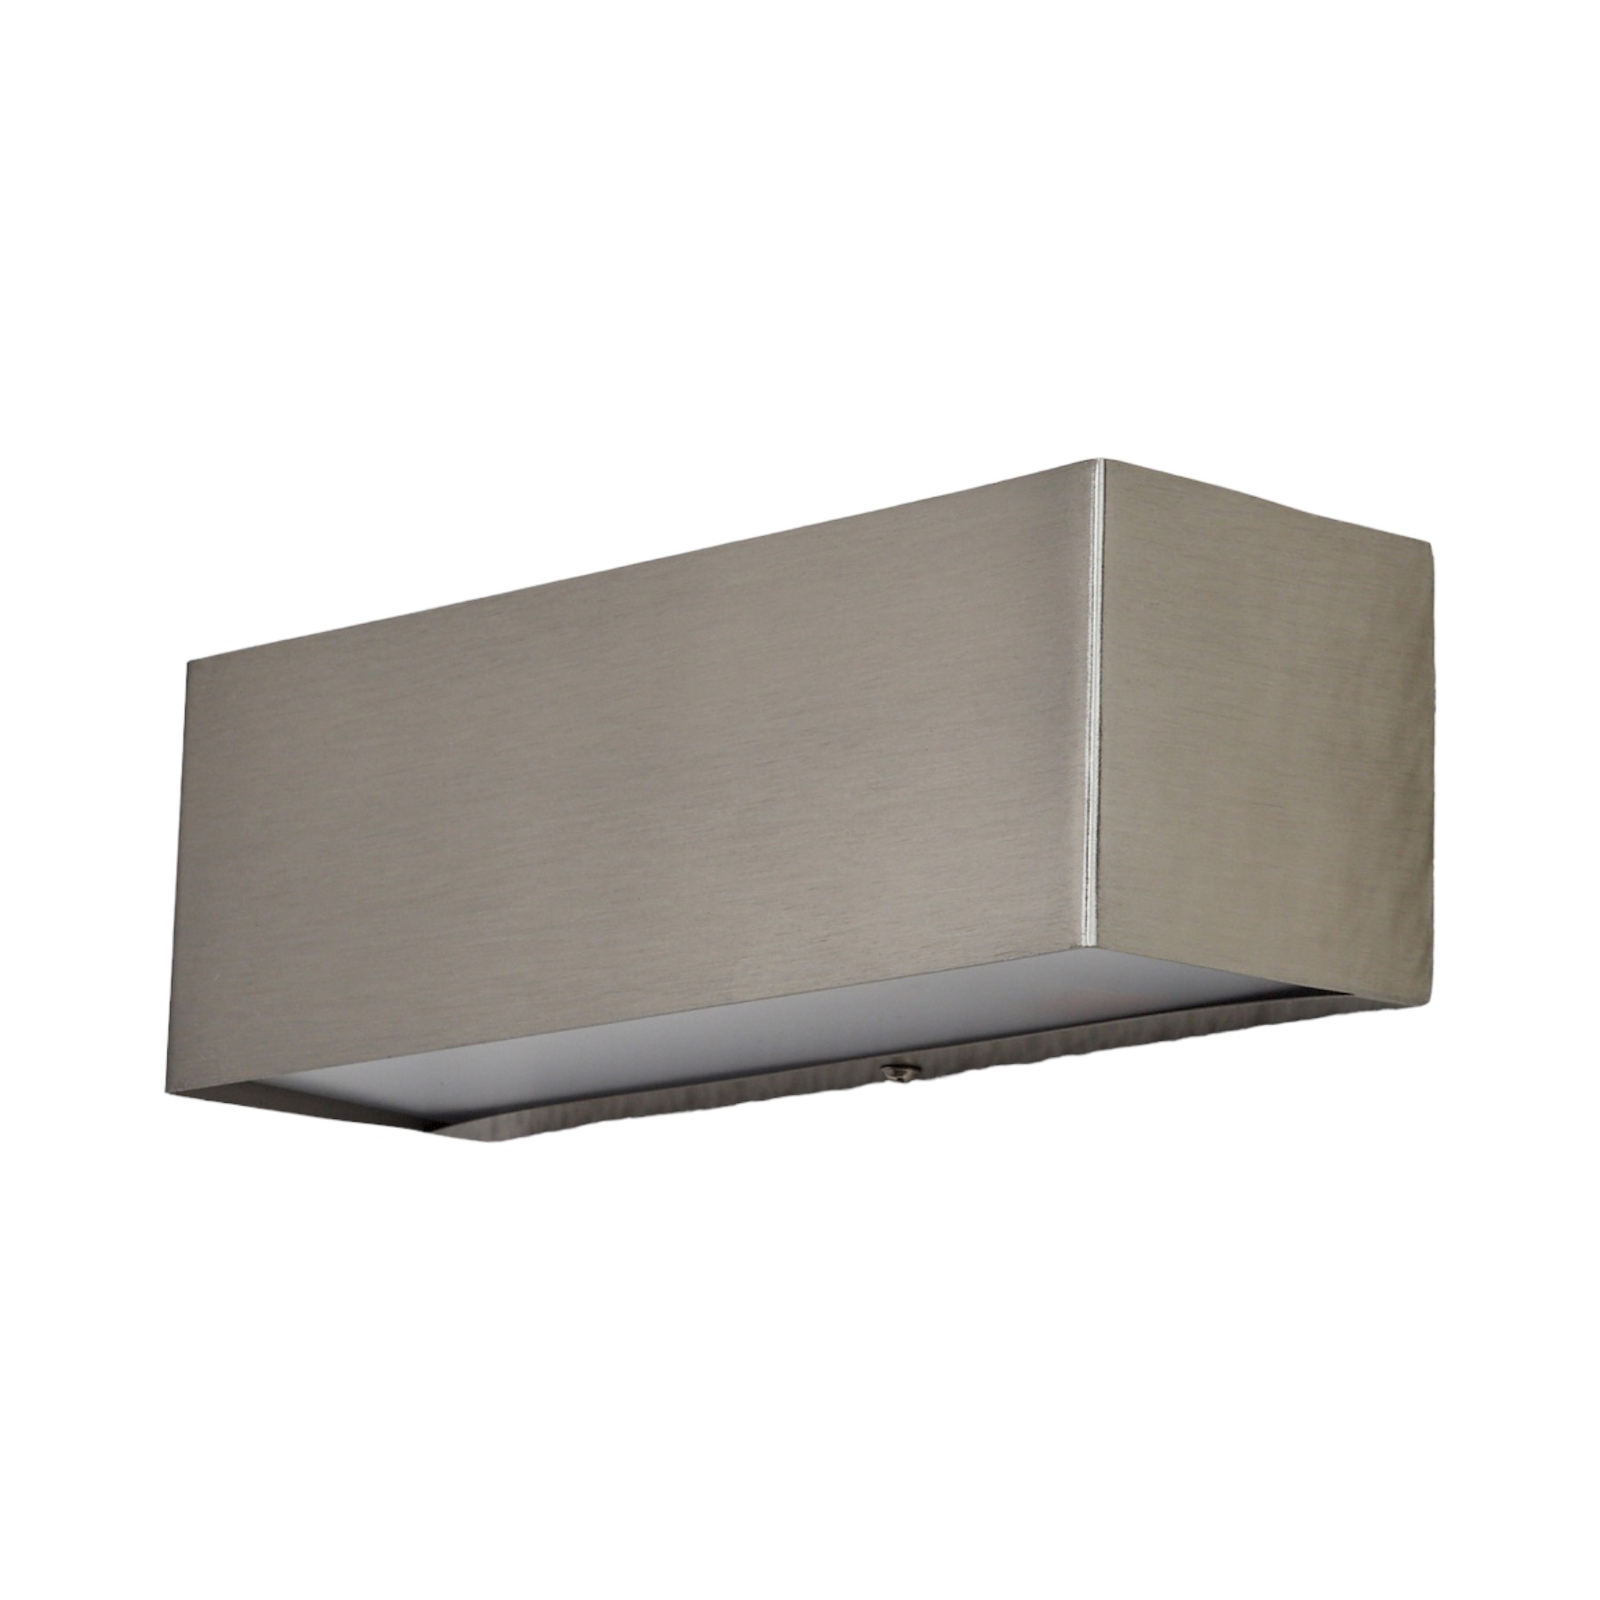 Rectangular wall lamp Alicia for outdoors